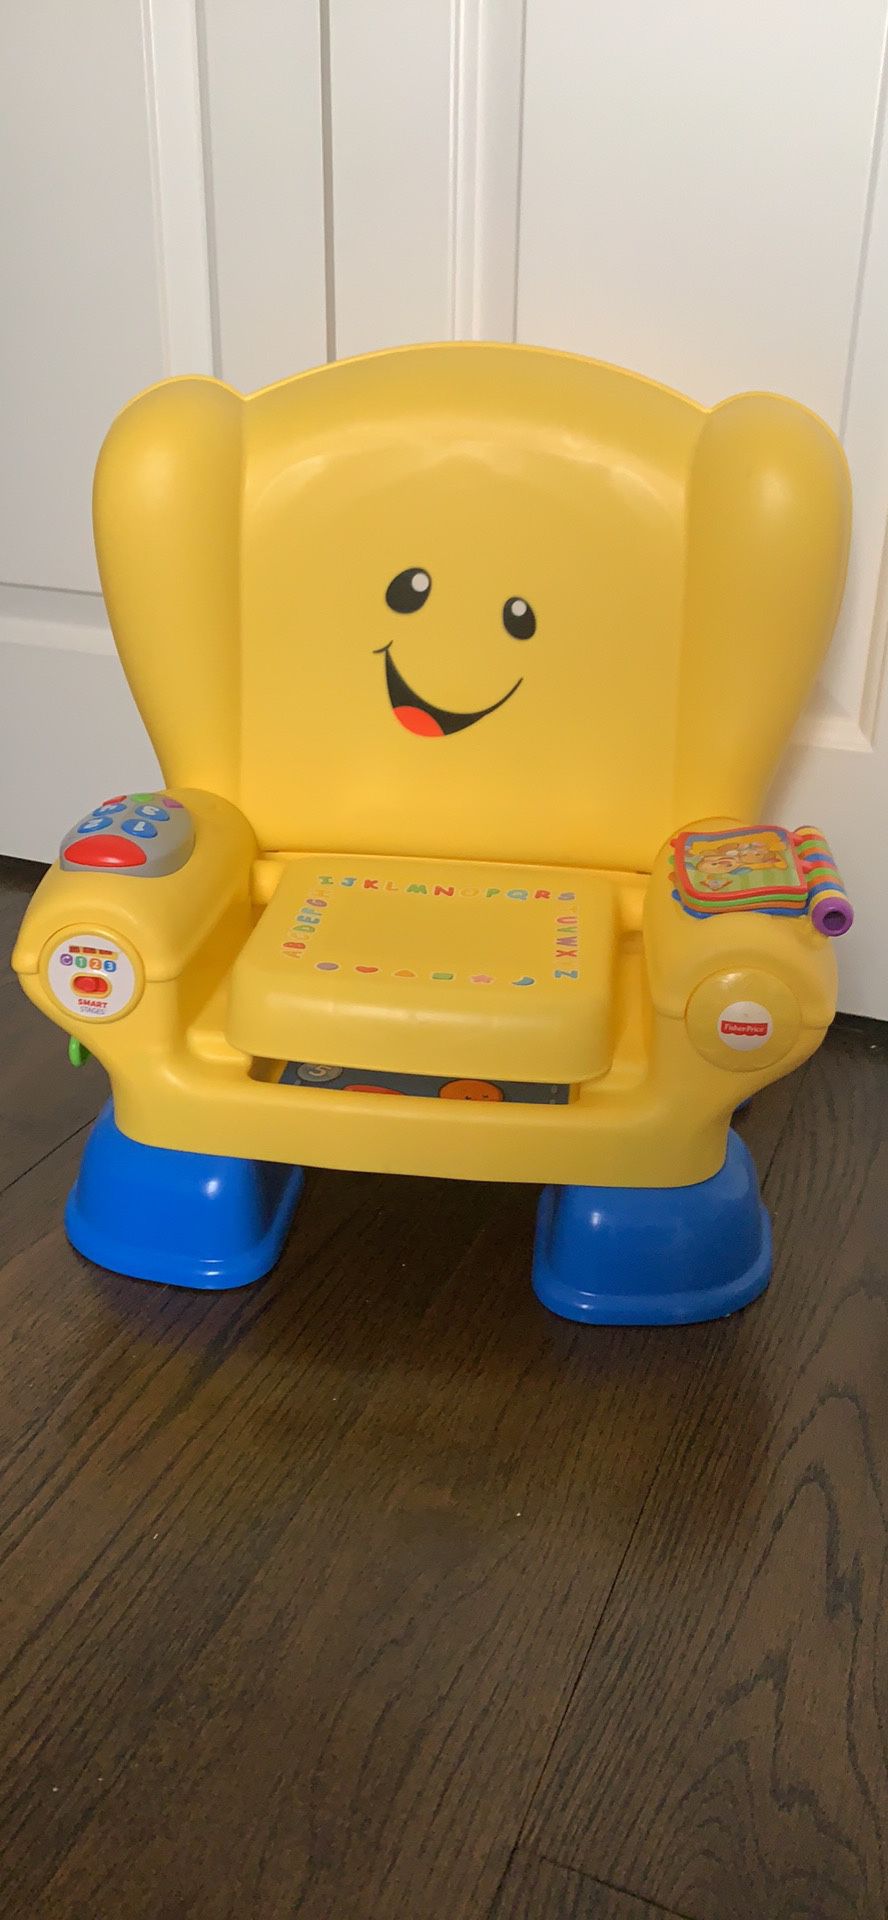 Fisher-Price Laugh & Learn Smart Stages Chair-kids learning chair, learn alphabet and numbers